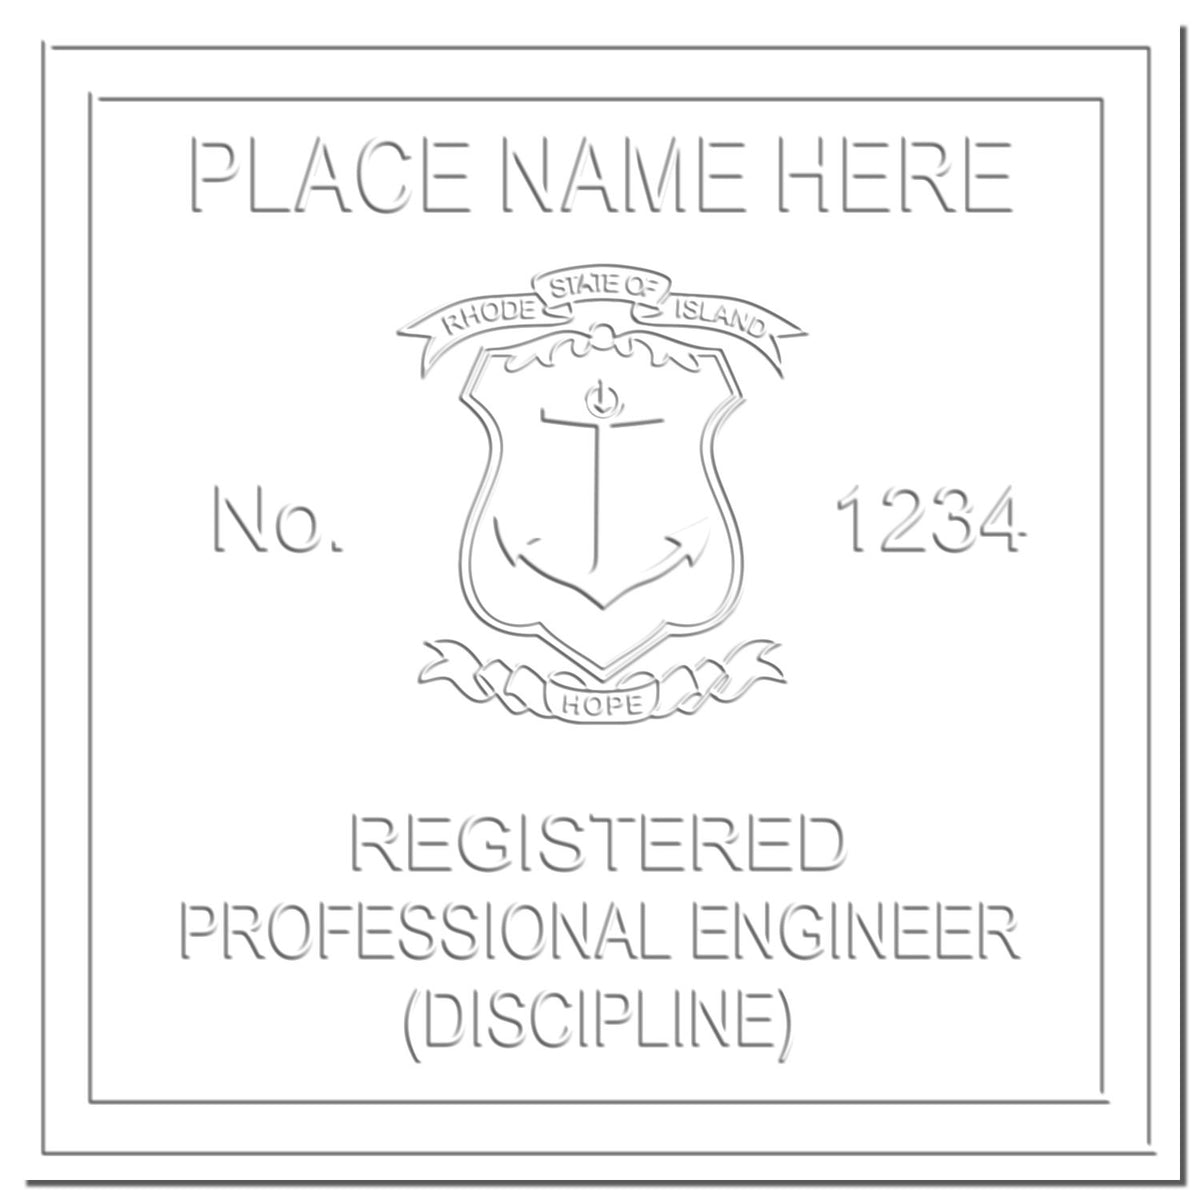 The Soft Rhode Island Professional Engineer Seal stamp impression comes to life with a crisp, detailed photo on paper - showcasing true professional quality.